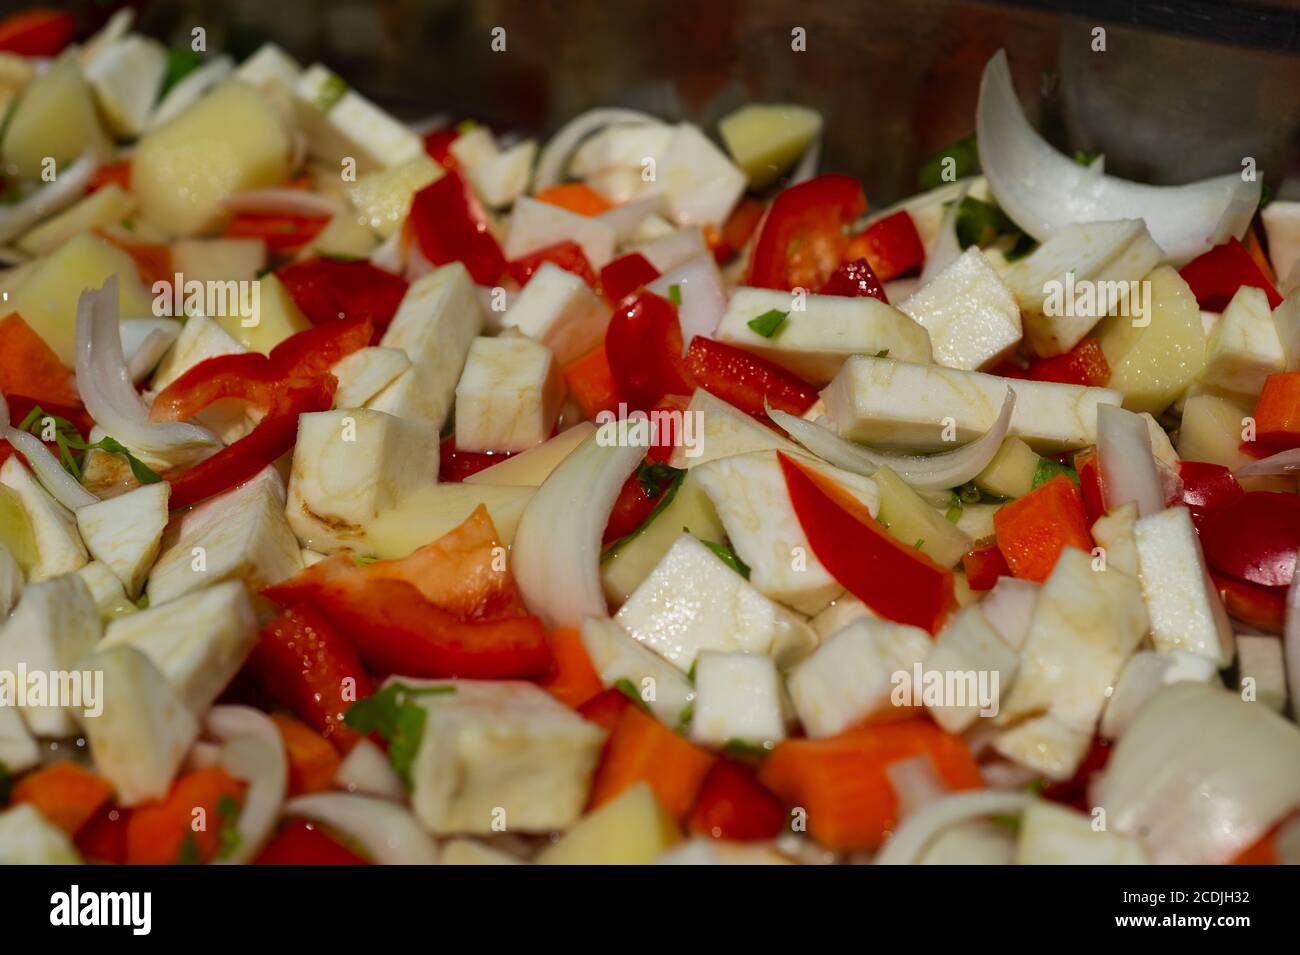 Fresh vegetables are chopped, flame grilled and boiled on an outdoor fire to prepare soup stock. Stock Photo